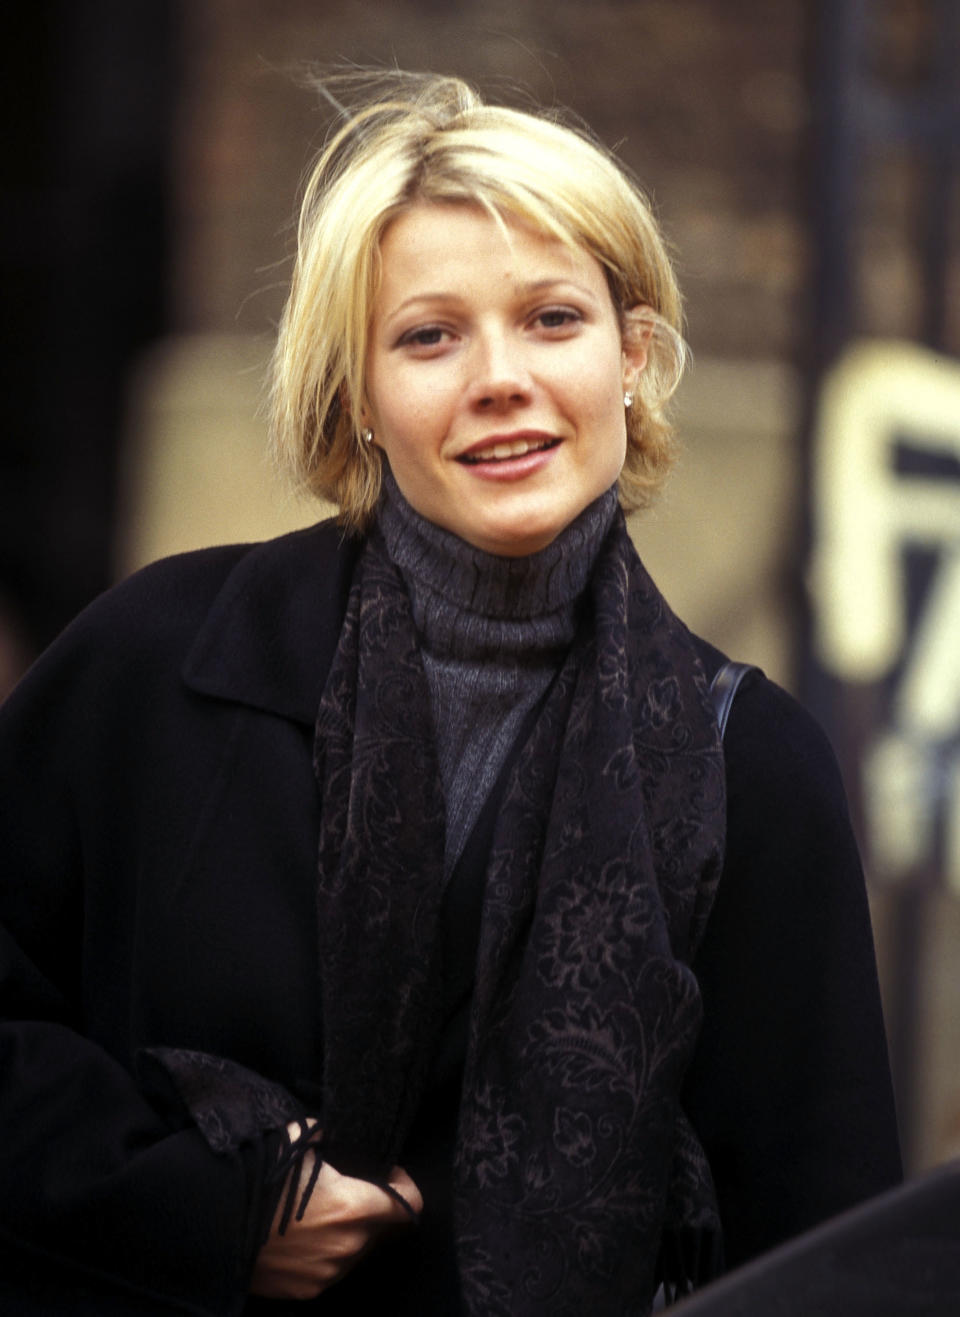 The actress on location for the film "A Perfect Murder" in 1997.